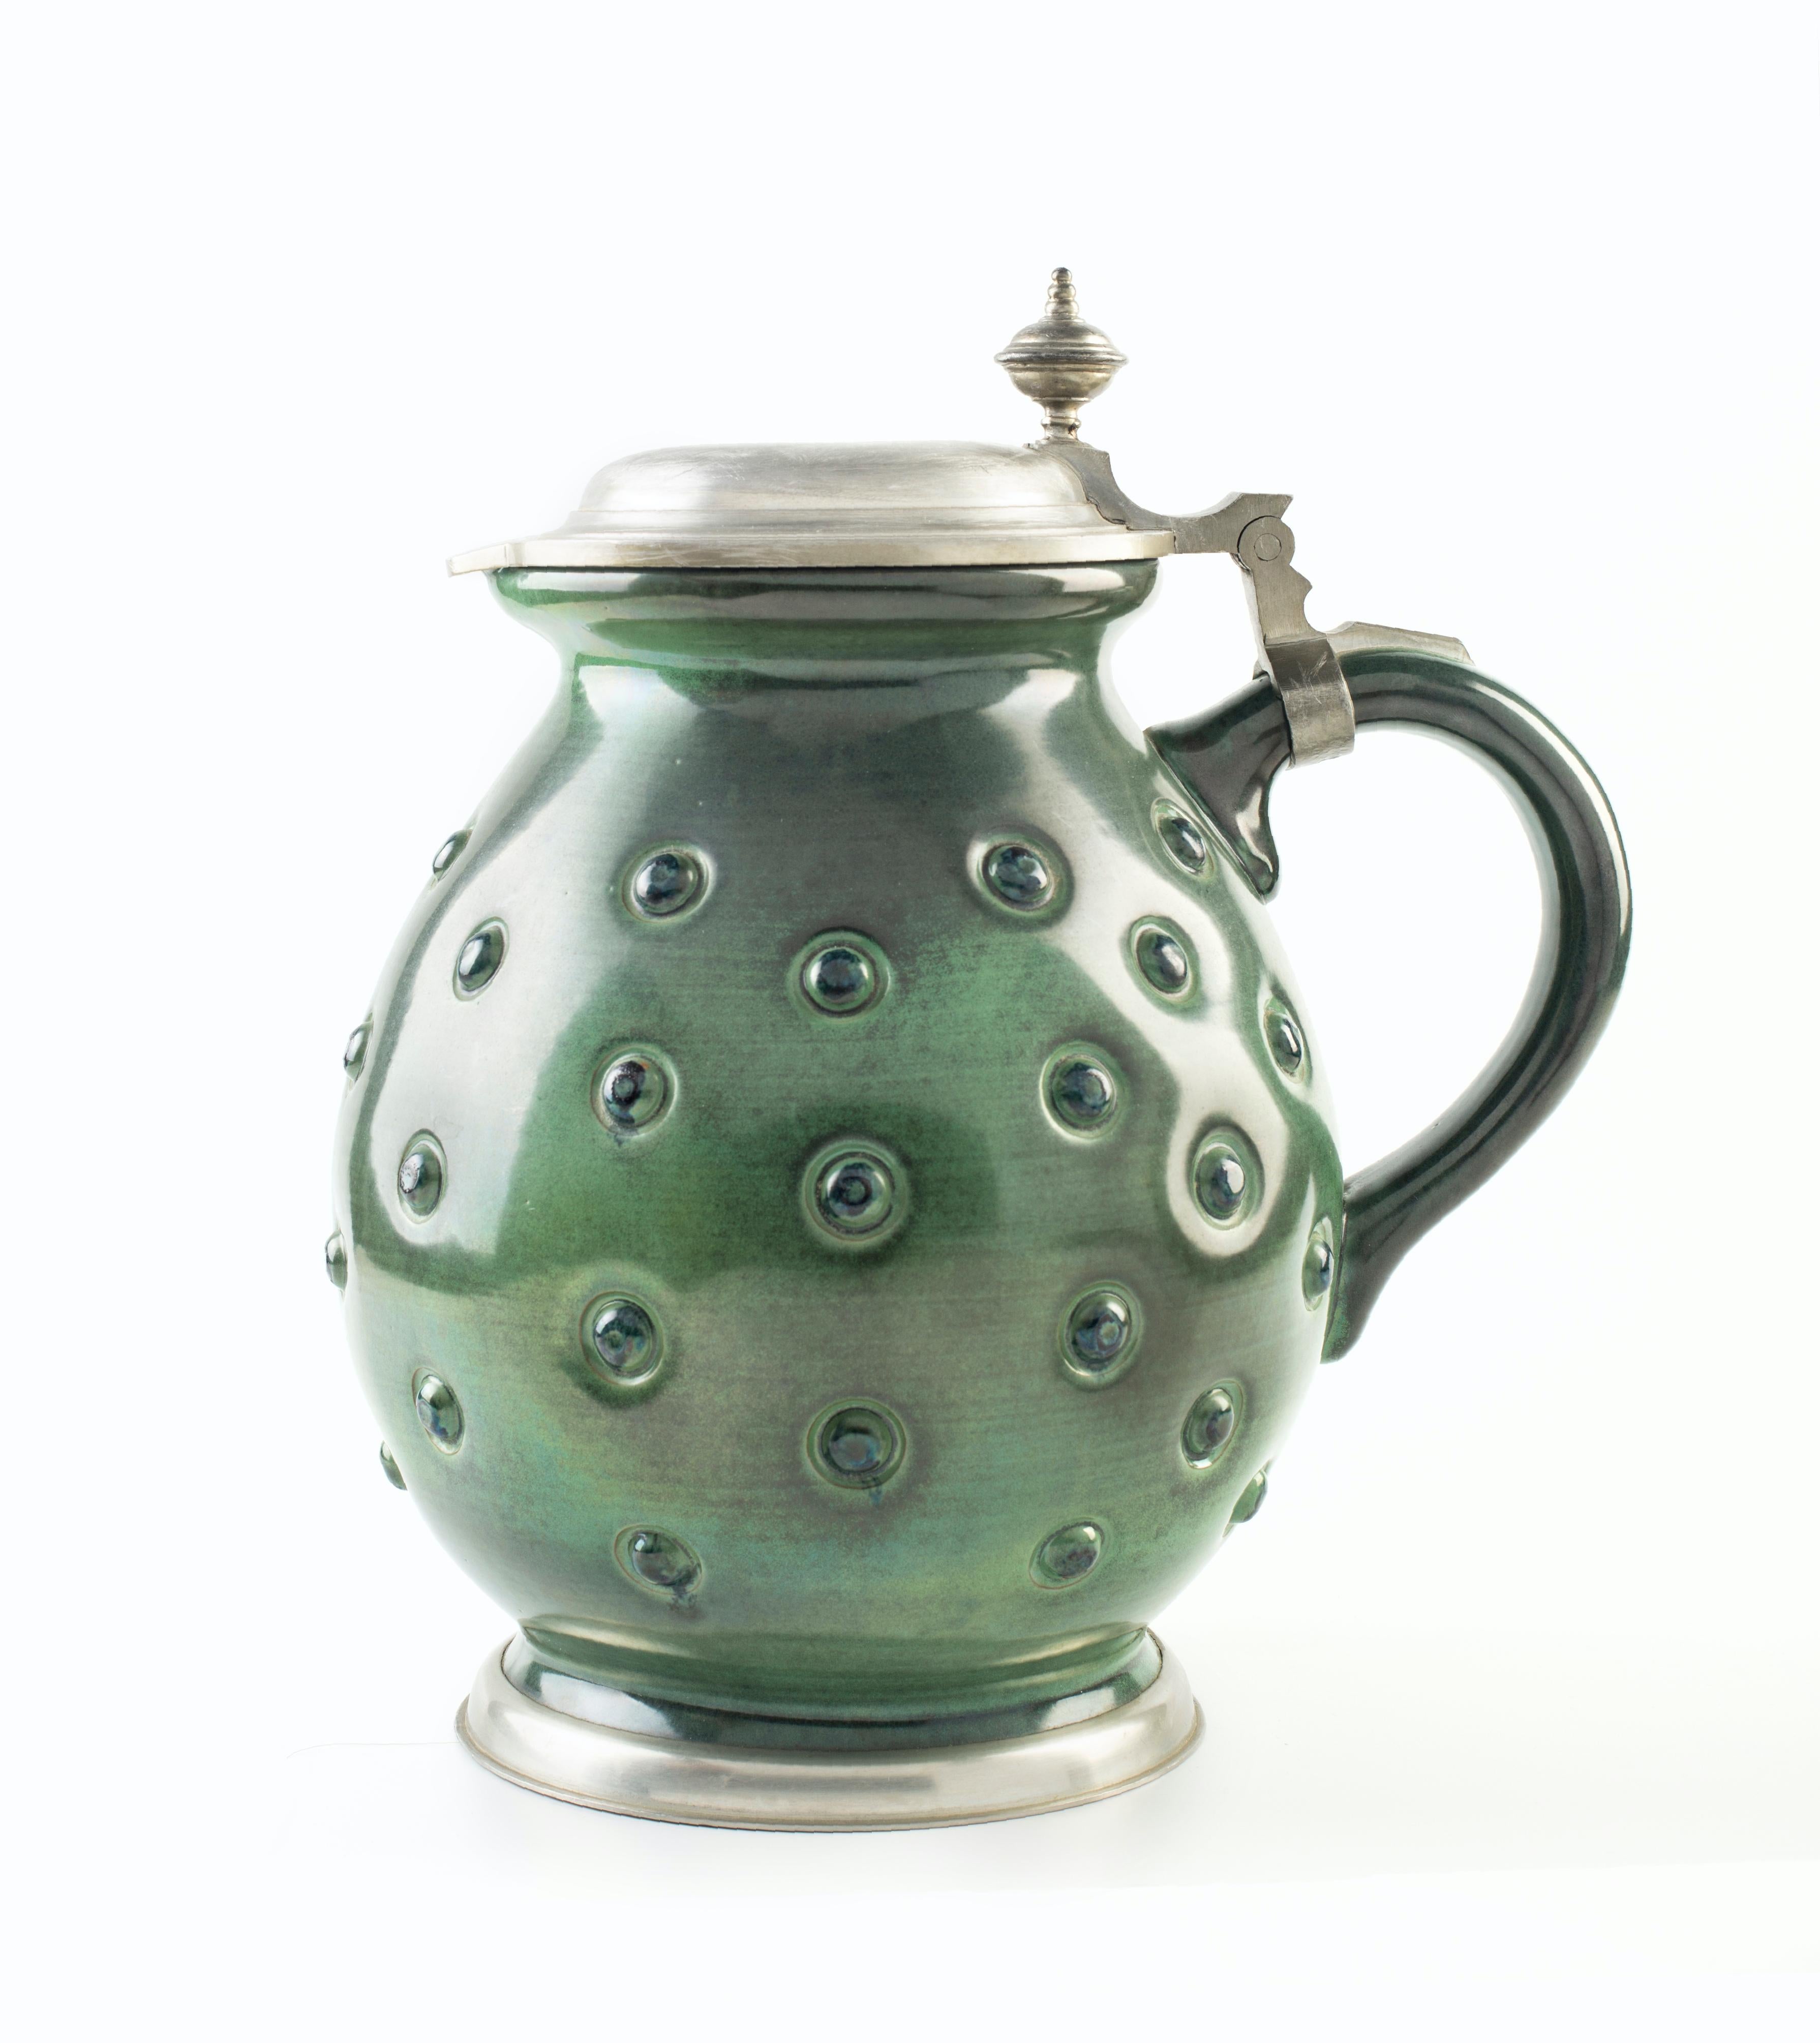 Two green pitchers by Eugen Wiedamann is an original decorative pair of objects realized between the 1950s and the 1970s.

Made in Germany and realized by Eugen Wiedamann, Regensburg.

The pair is composed by different materials: metal, colored